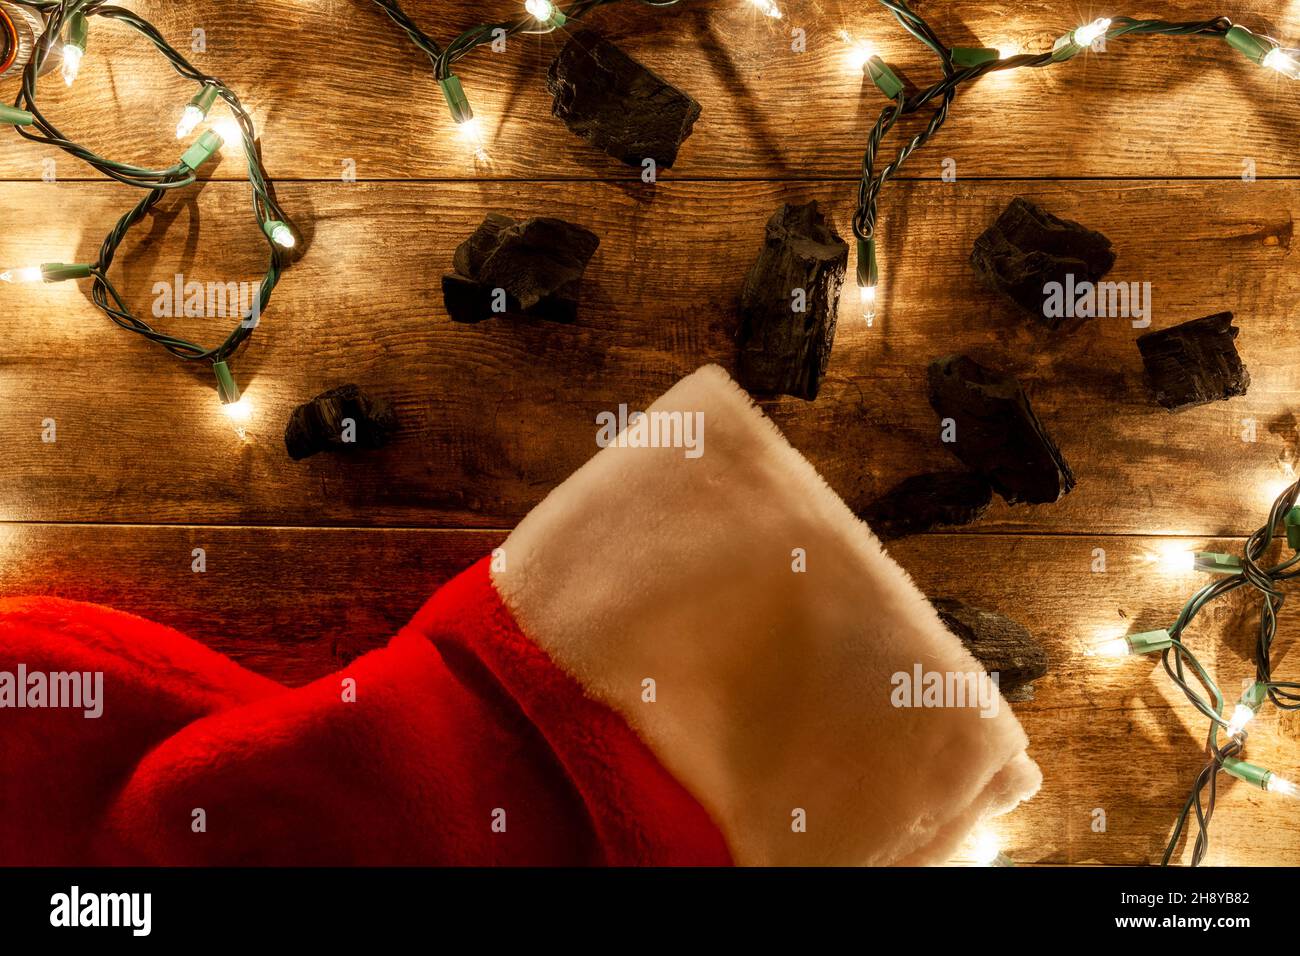 naughty kid who do not behave get coal for christmas concept. Coal pieces go out of christmas stocking o wooden background with string lights around i Stock Photo